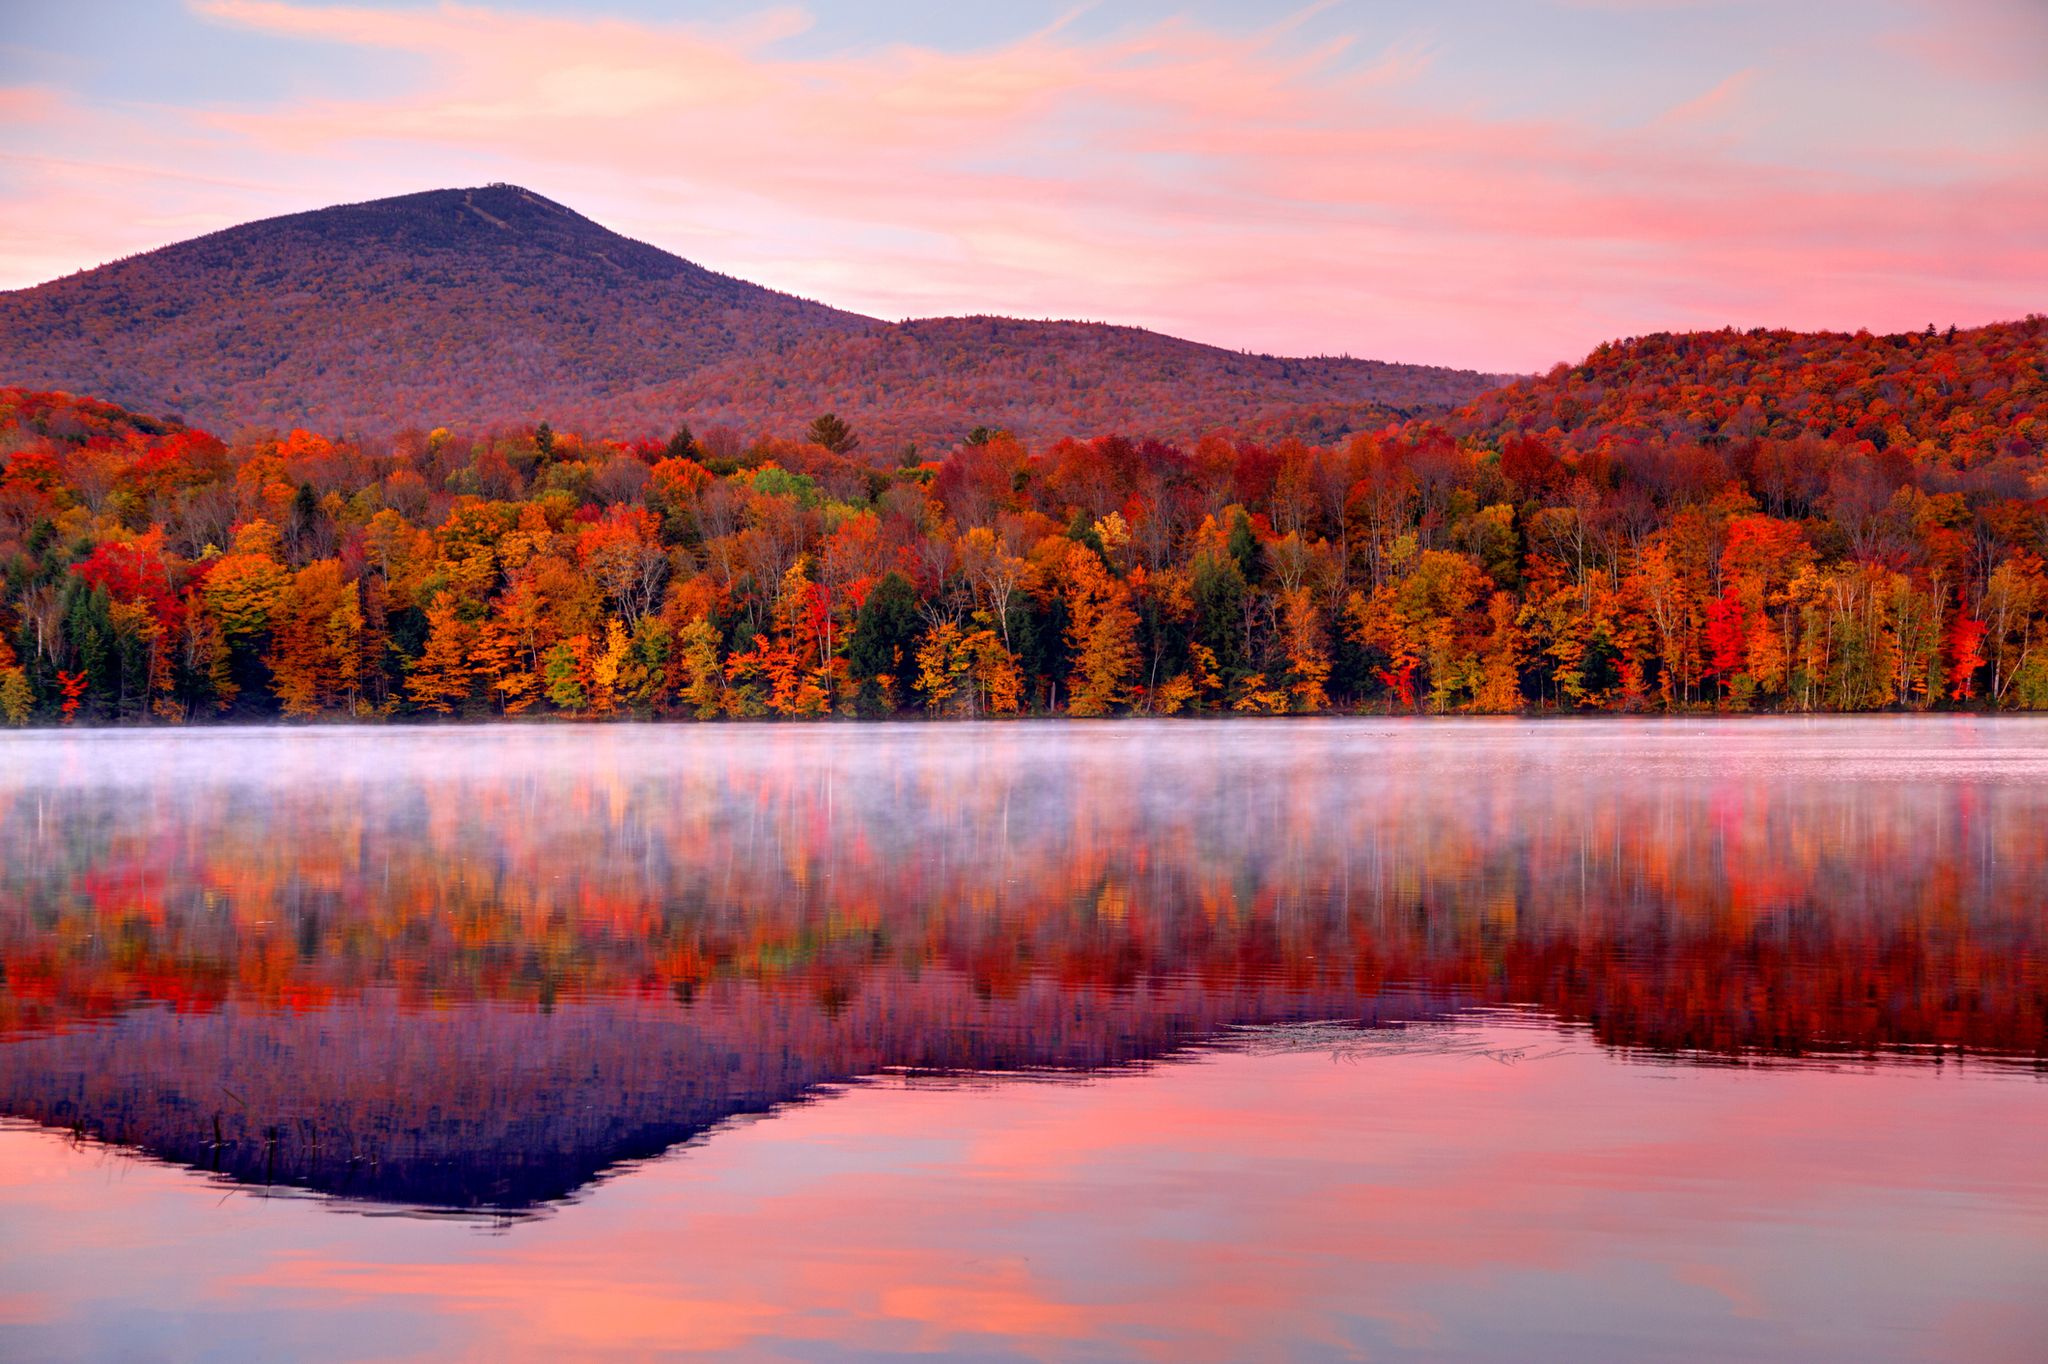 The 12 Most Beautiful Places To See Fall Foliage This Year According